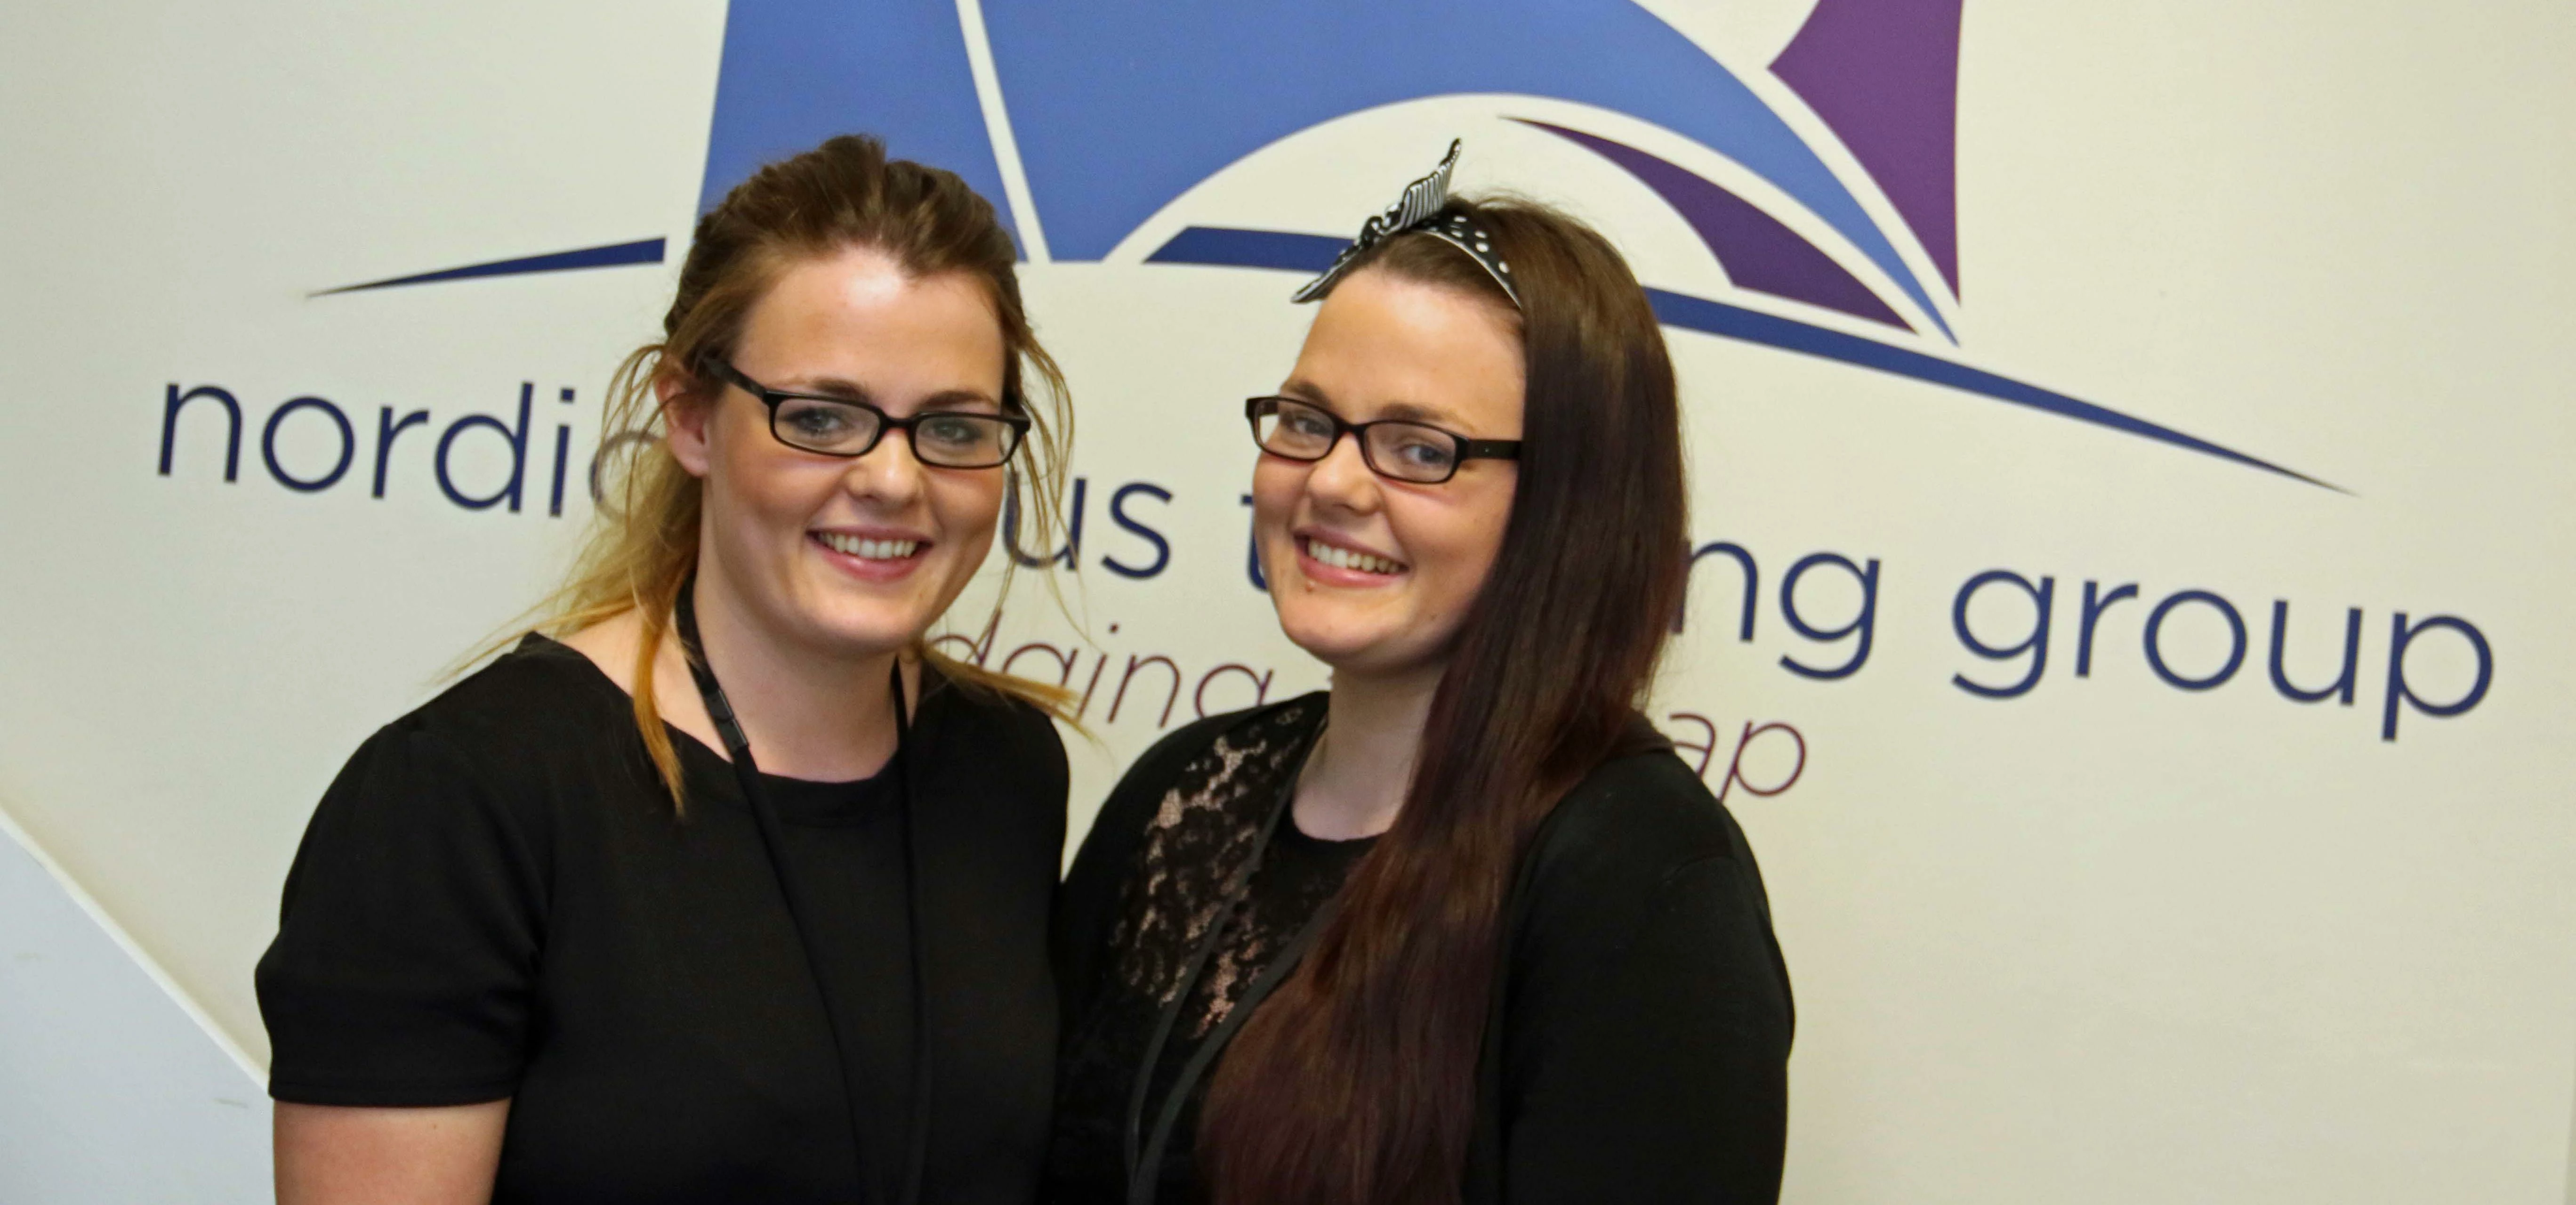 At the double: ( L-R) Sarah Frew and Laura Frew, who are forging careers thanks to Nordic Focus Trai